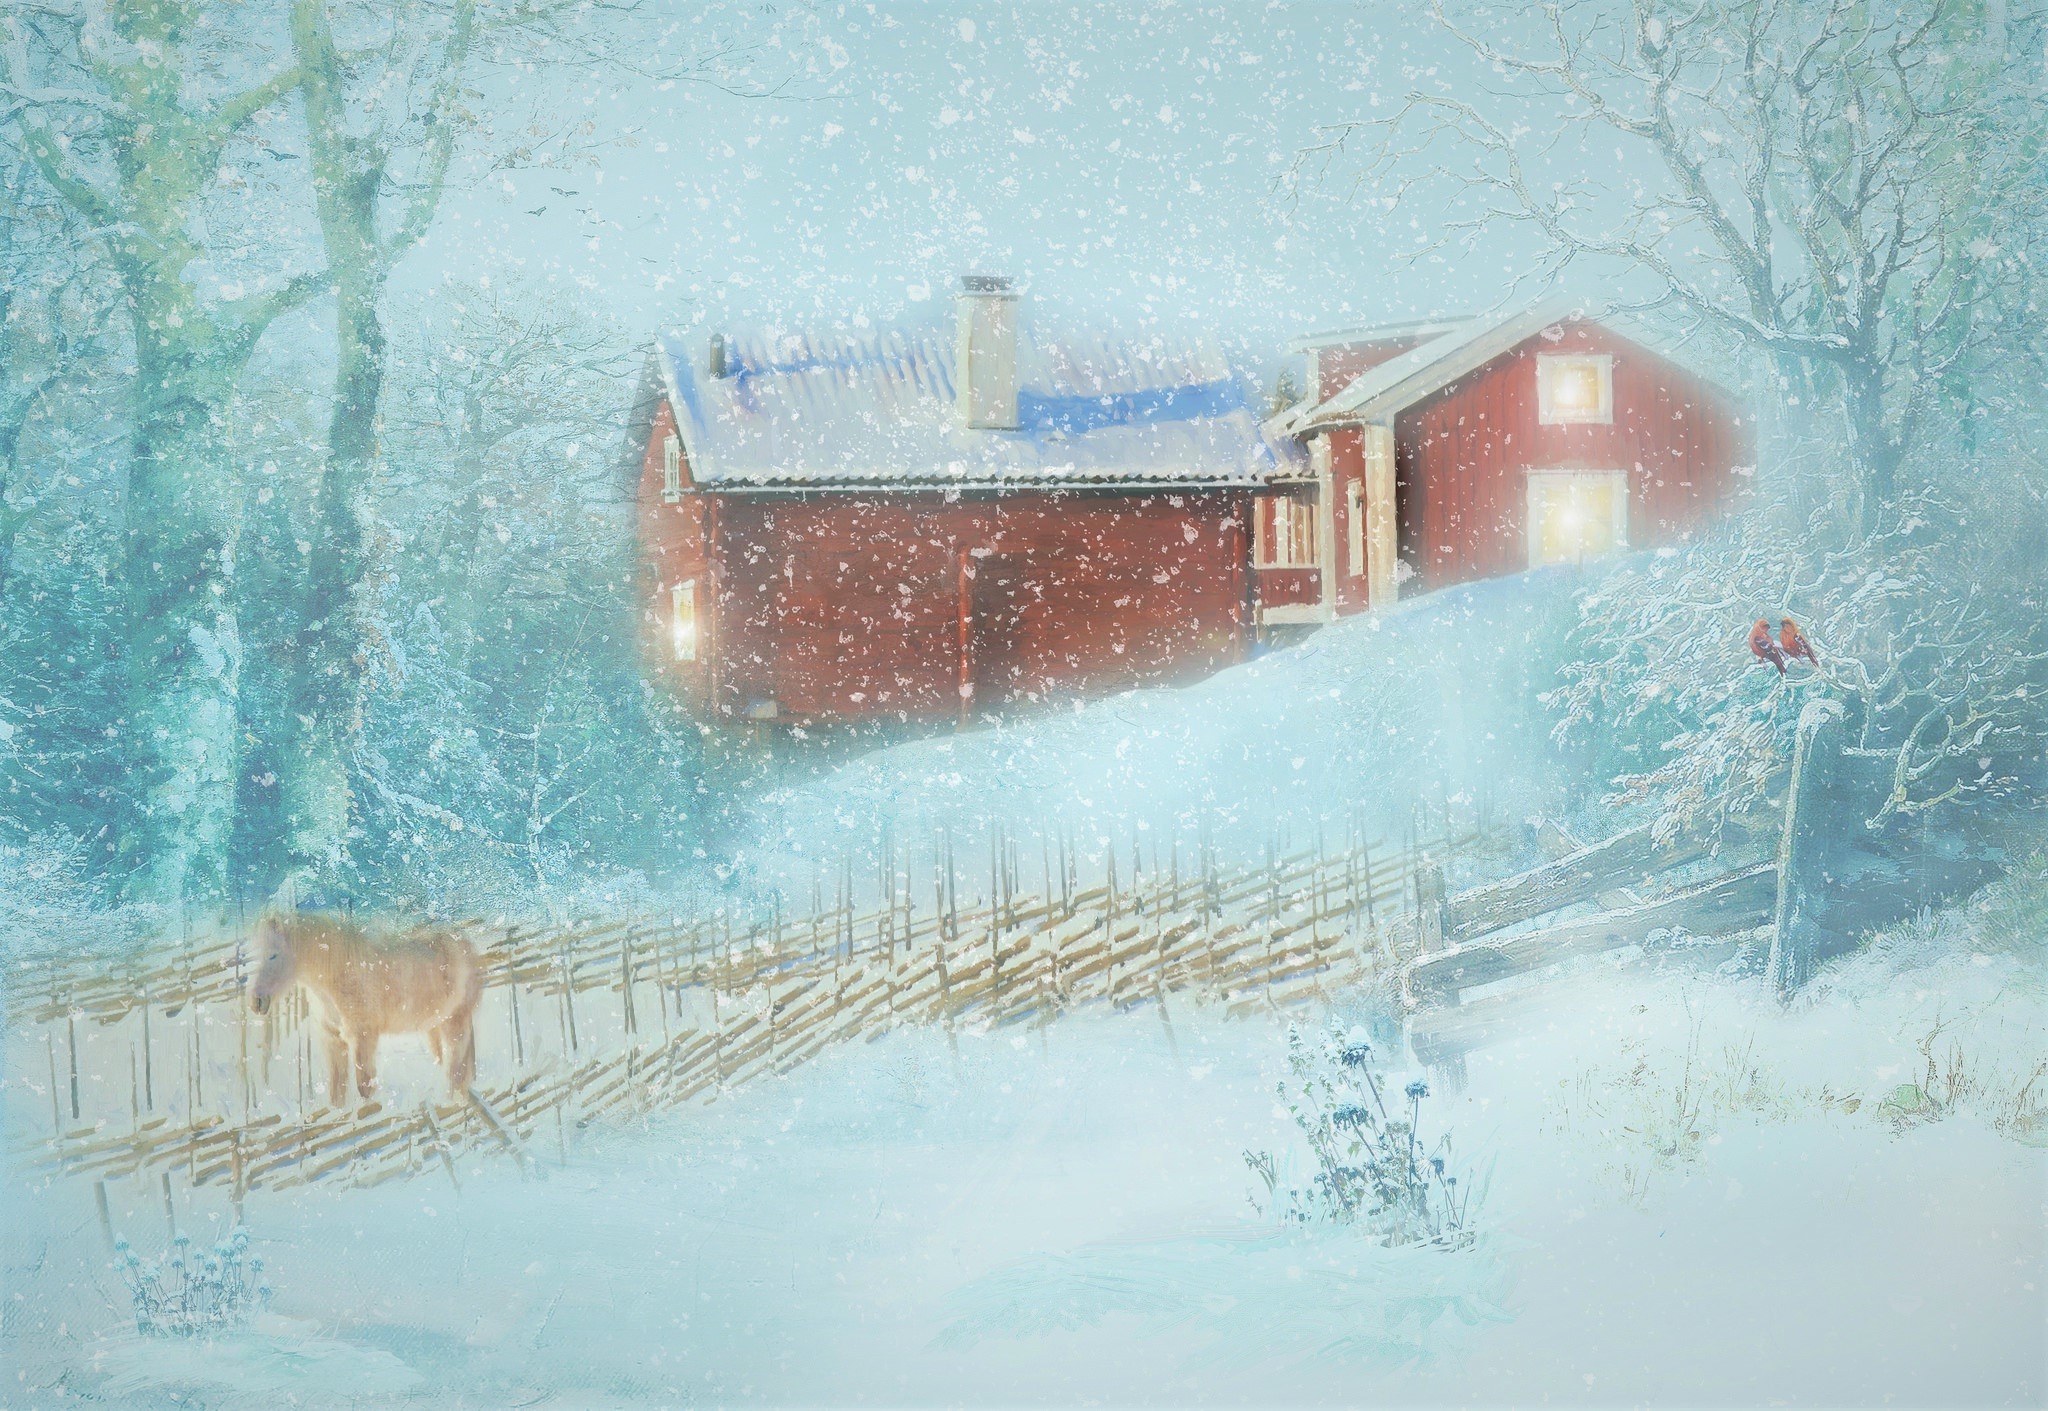 painting, artistic, cardinal, country, donkey, fence, house, snow, snowfall, tree, winter